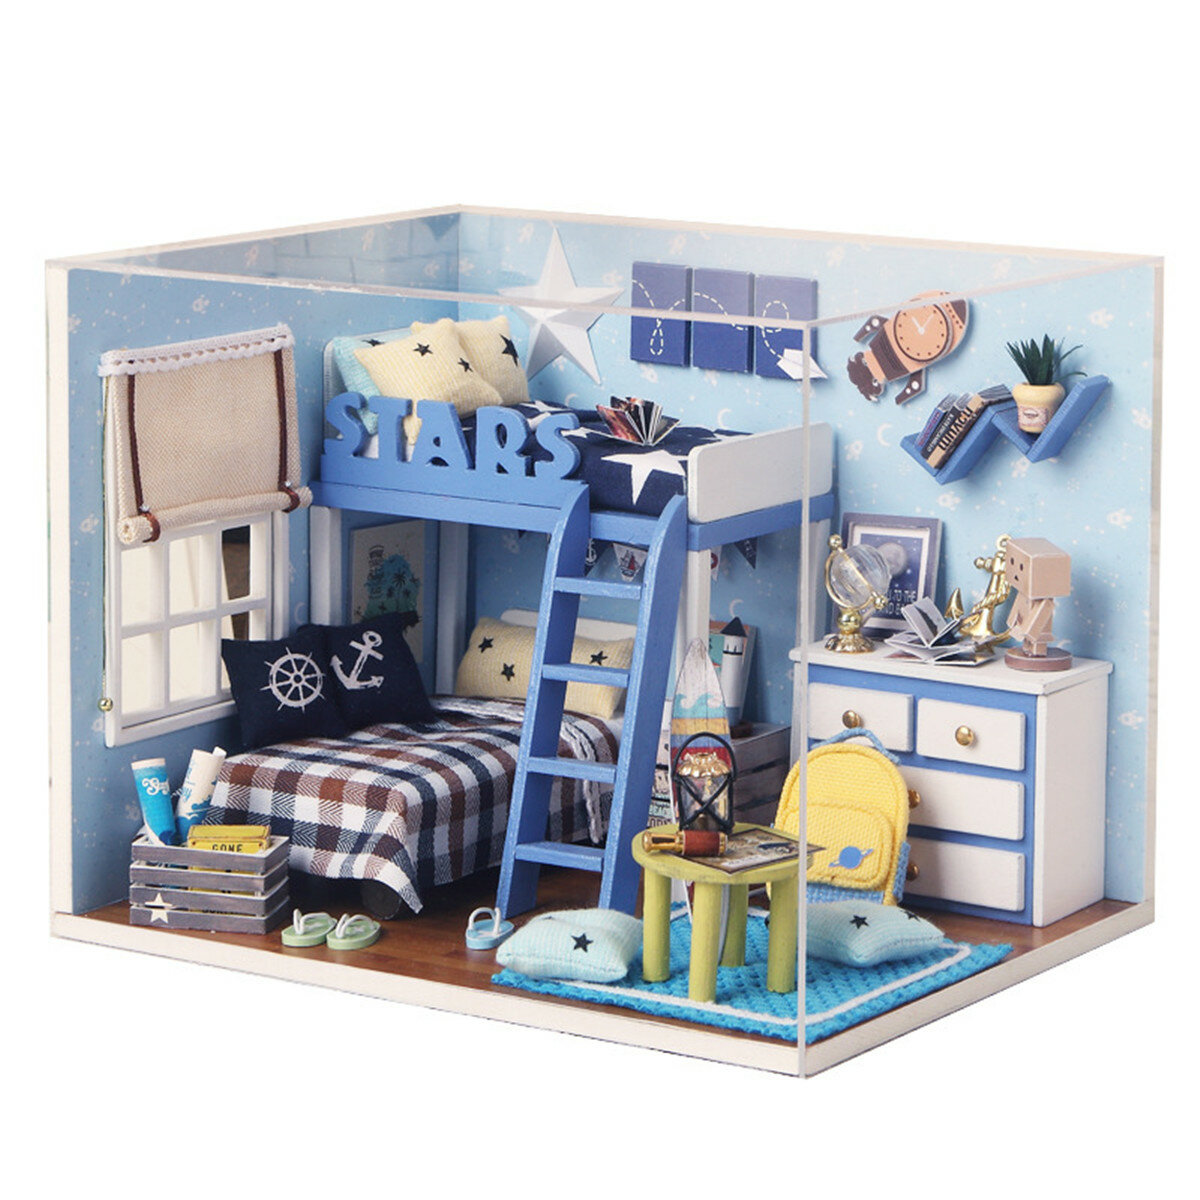 DIY Doll House Set Wooden Blue Pink Doll House With LED Lighting Children Hands On Ability Training Toys For Home Decoration